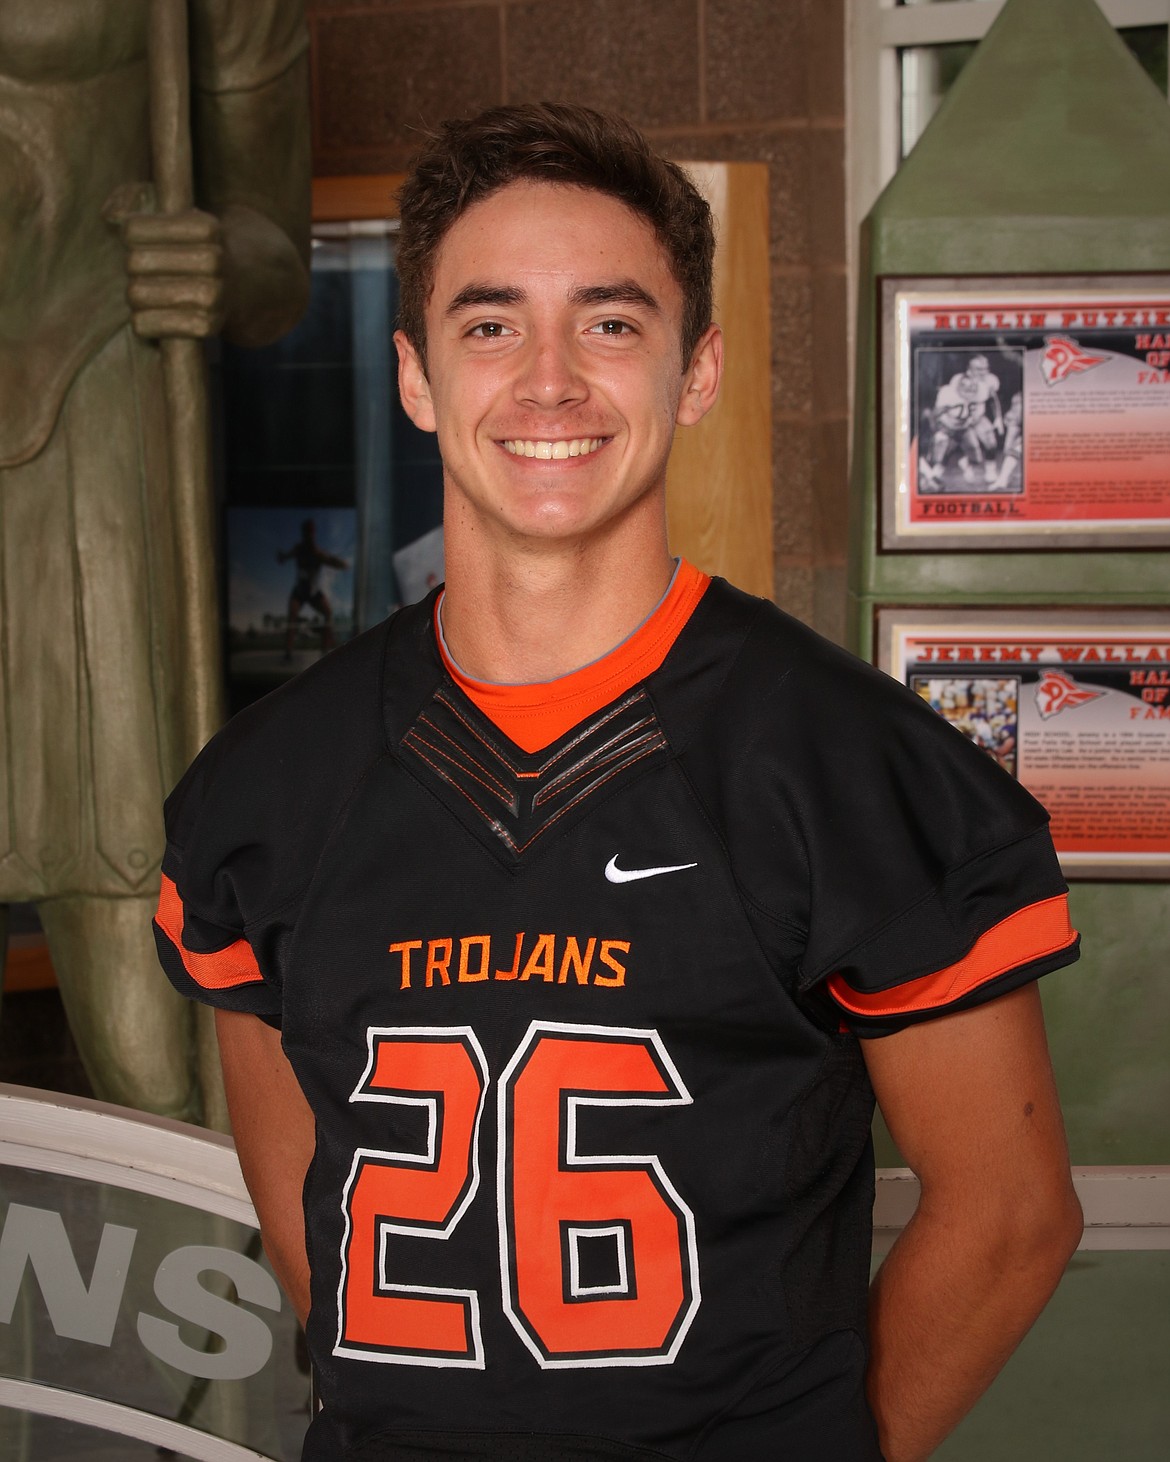 Courtesy photo
Senior Zach Clark is this week's Post Falls High School Athlete of the Week. Clark had one catch for 61 yards and had seven tackles and an interception in a win against Coeur d'Alene on Friday.